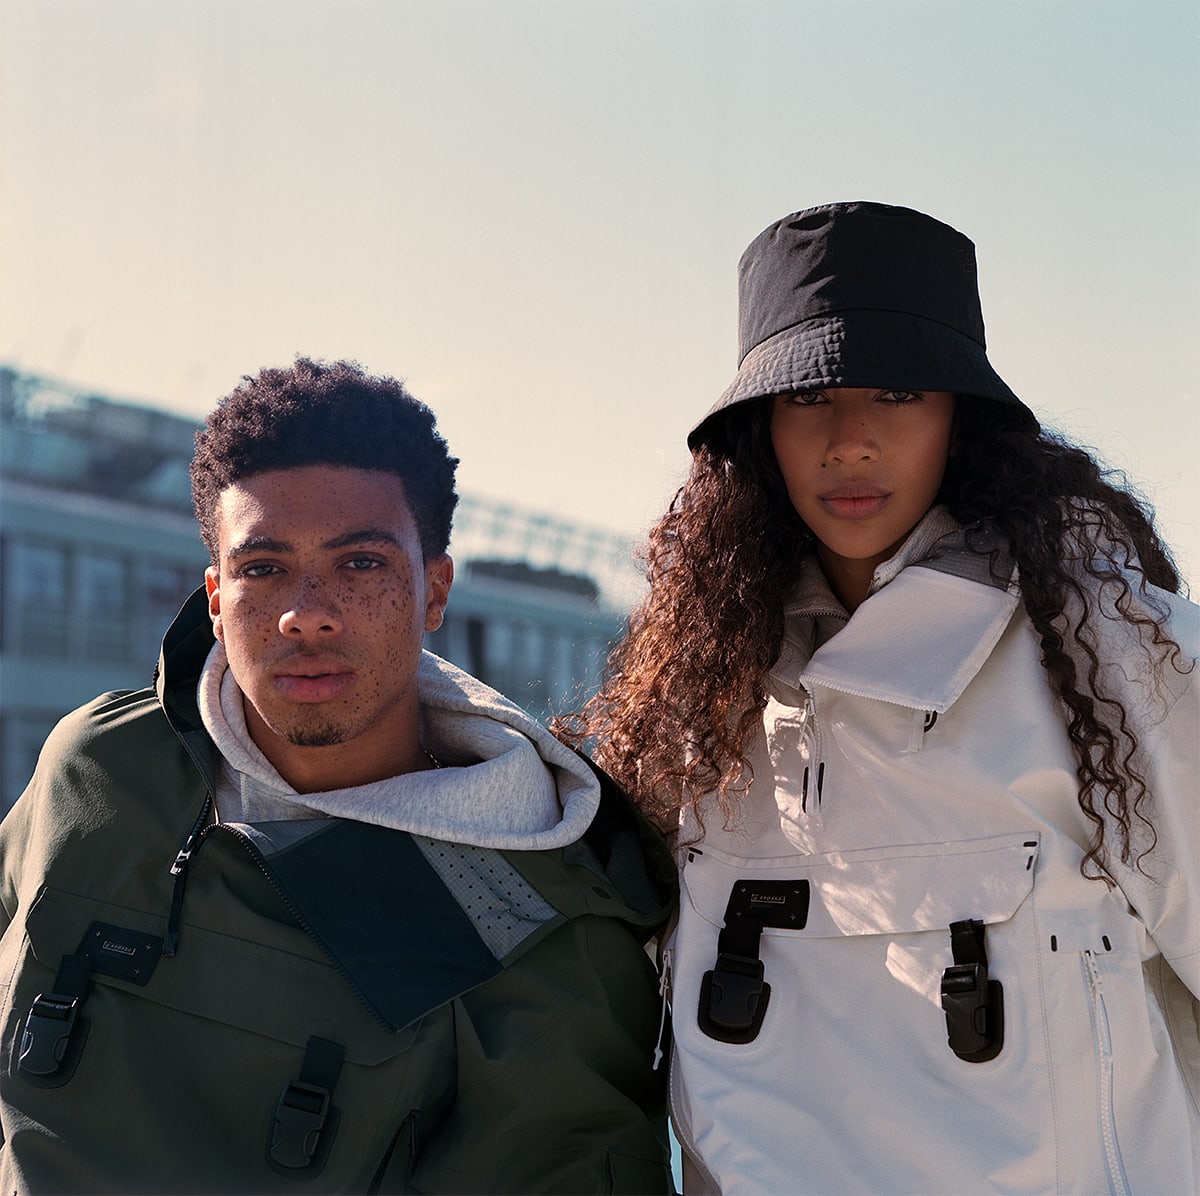 Models Julia Biango and Leron Nurse wearing Armada ski outerwear jackets, her jacket is white his jacket is army green. She is wearing a black bucket hat. They are standing in front of an industrial building it is a sunny day, blue sky. The male model has a lot of freckles. Look-book photographed by New York photographer Maria Bruun. The image was taken using the Hasselblad 500CM camera and Kodak Portra film.